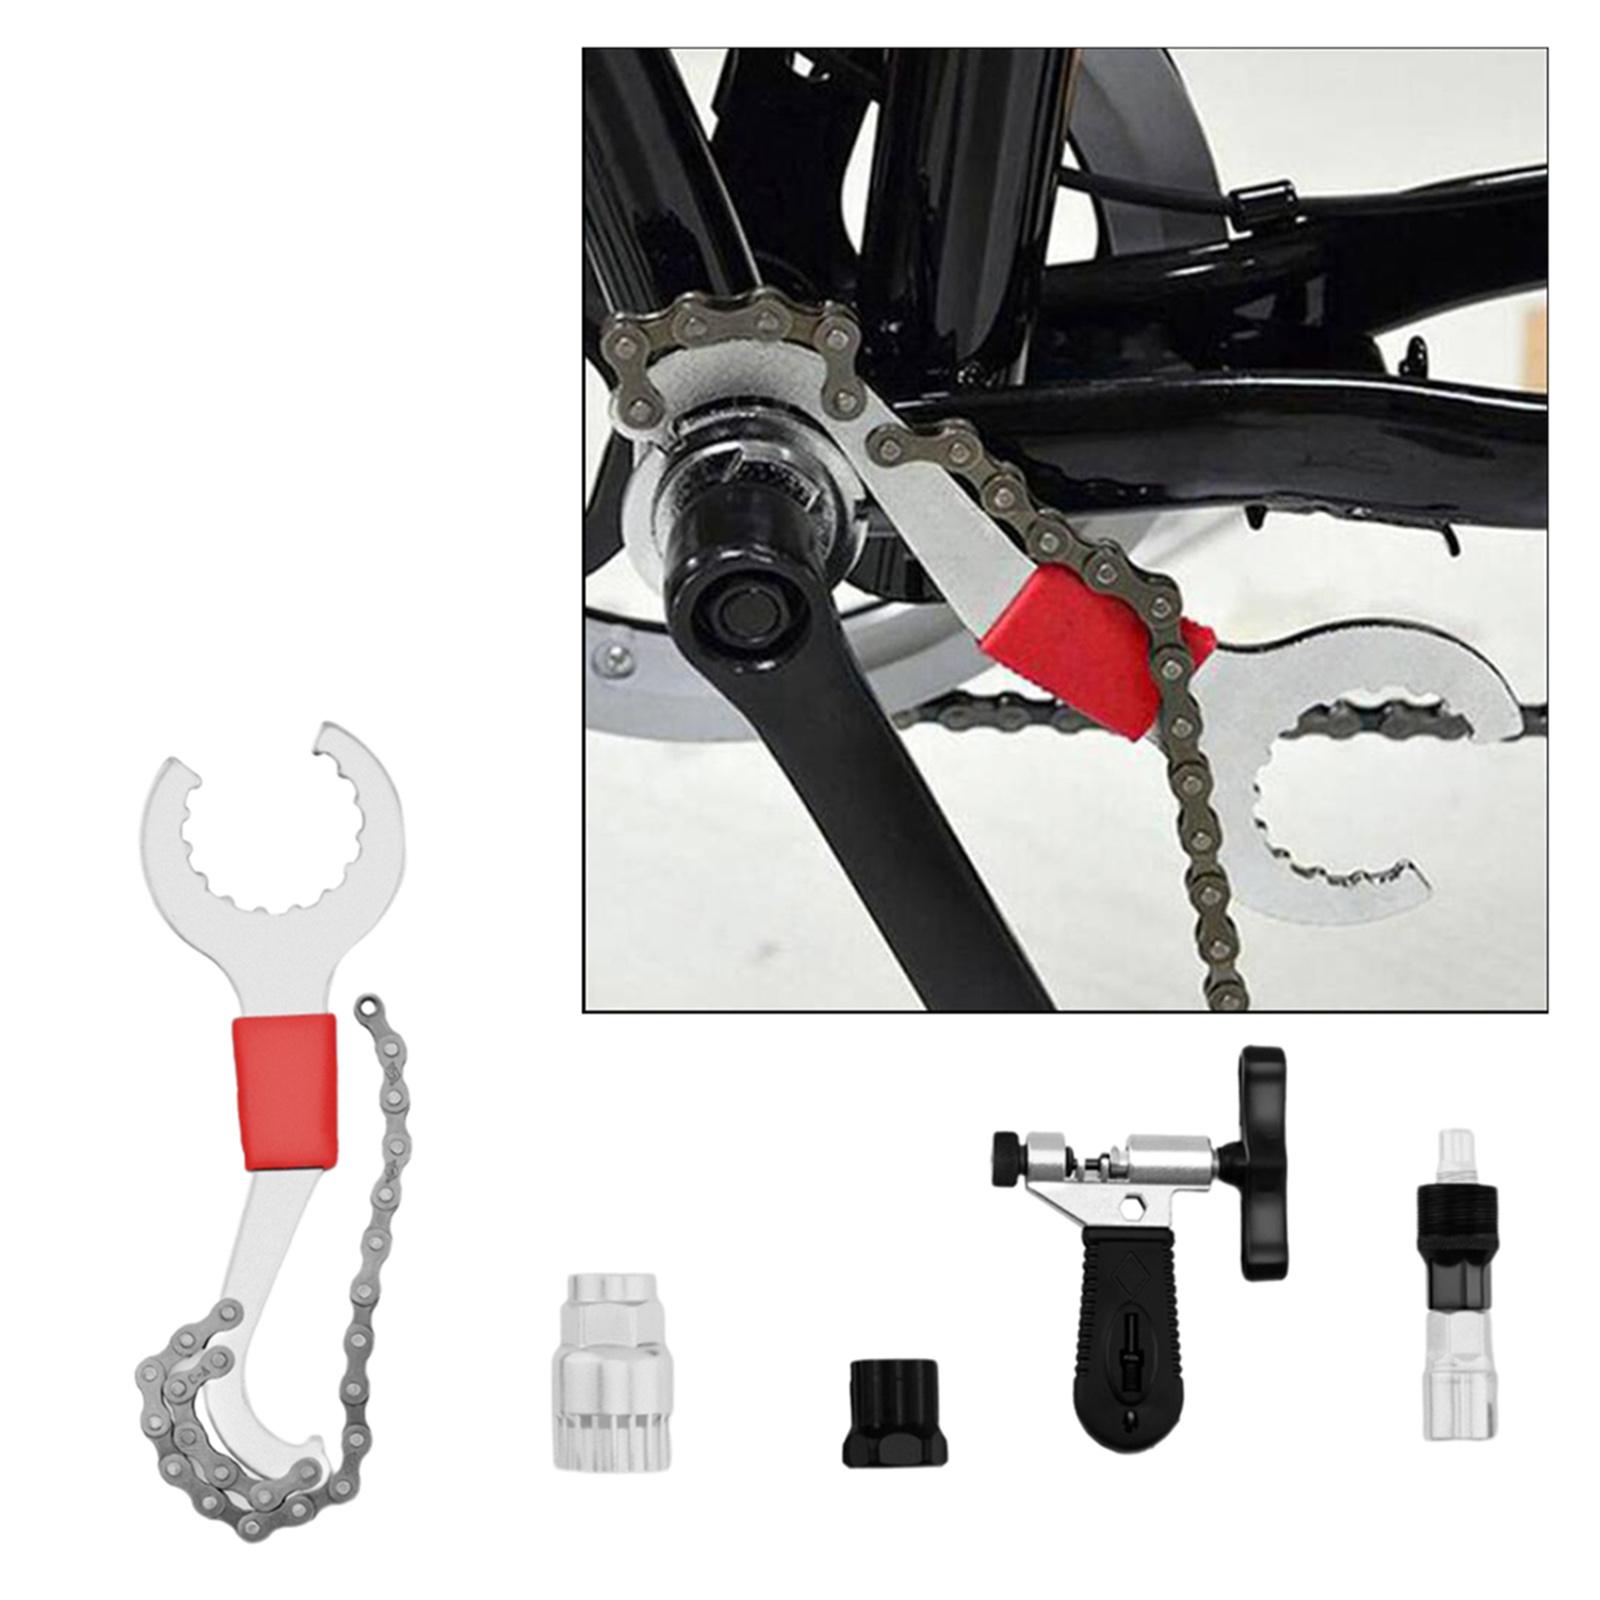 Bicycle Crank Extractor Puller Bottom Bracket Remover Chain Cutter Tool Set 4Pcs+153Chain Cutter